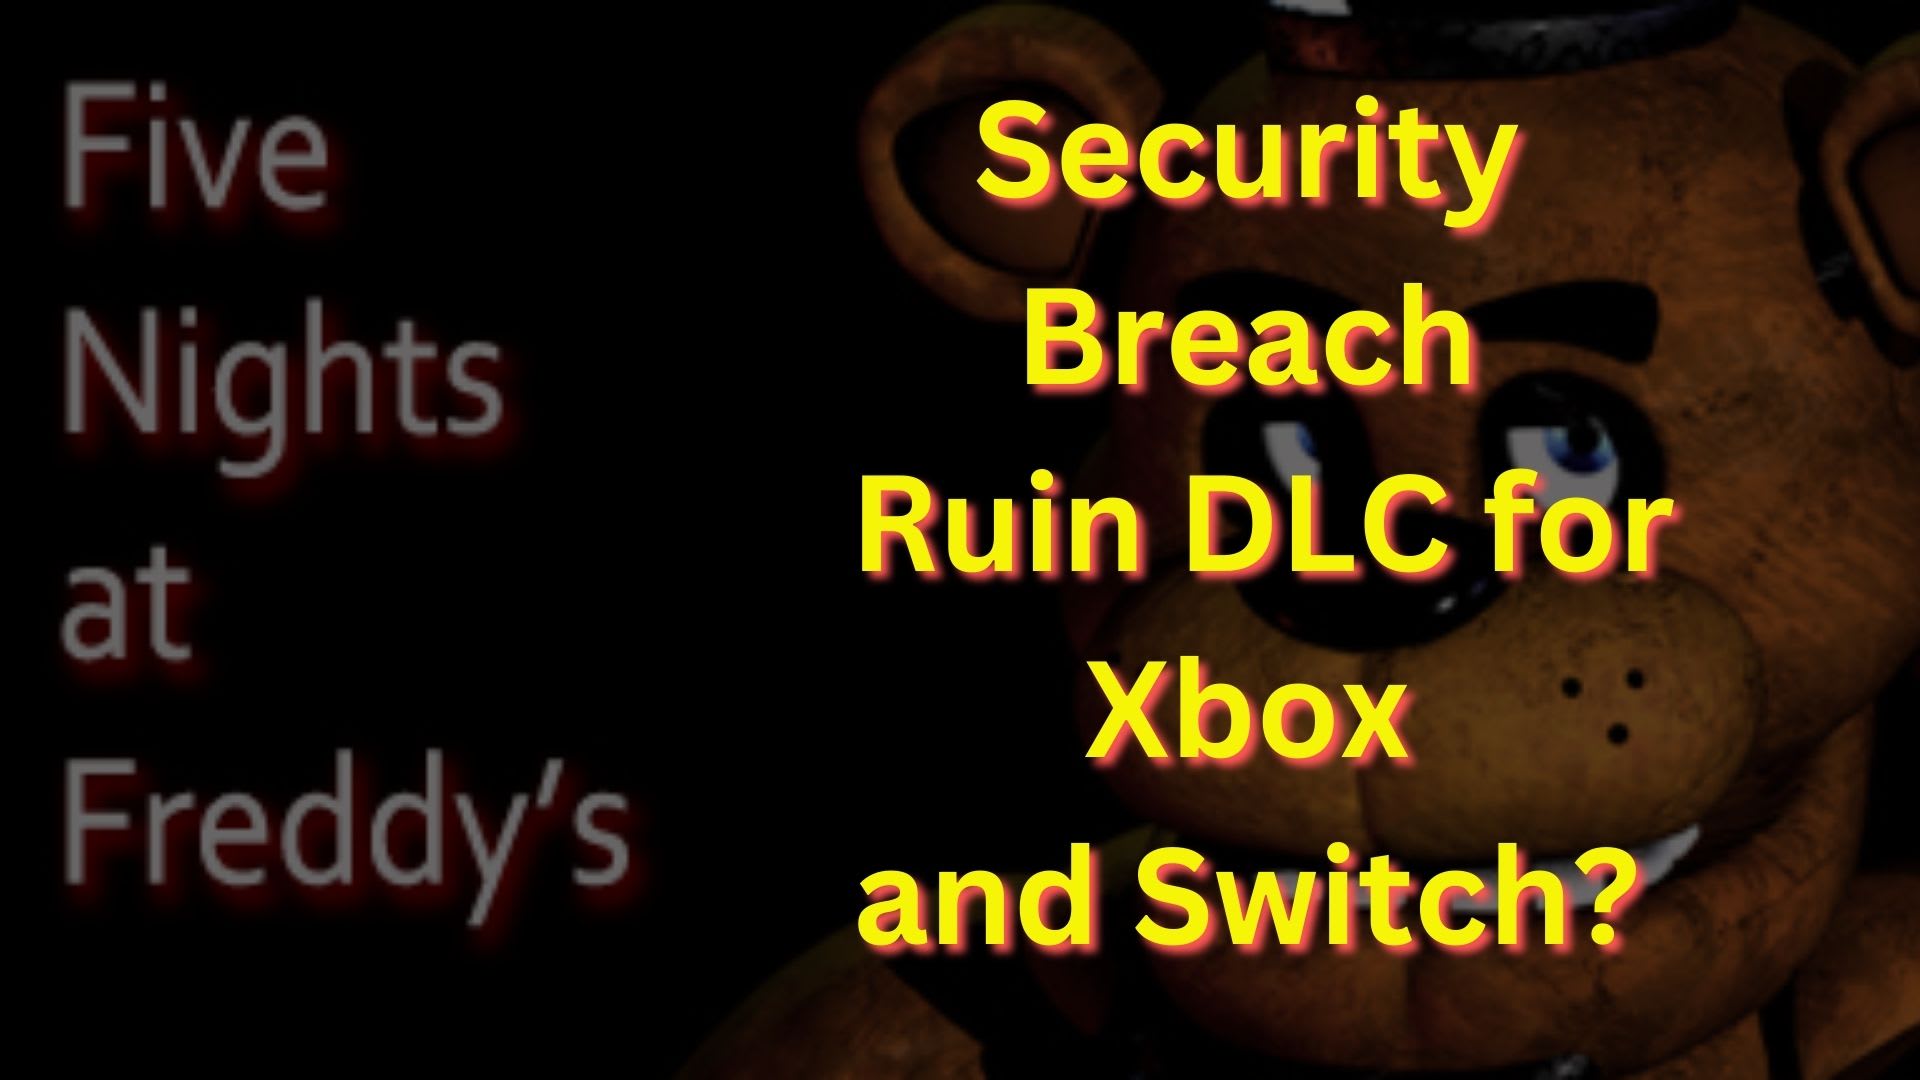 Five Nights at Freddy's: Security Breach Release Date Revealed - mxdwn Games